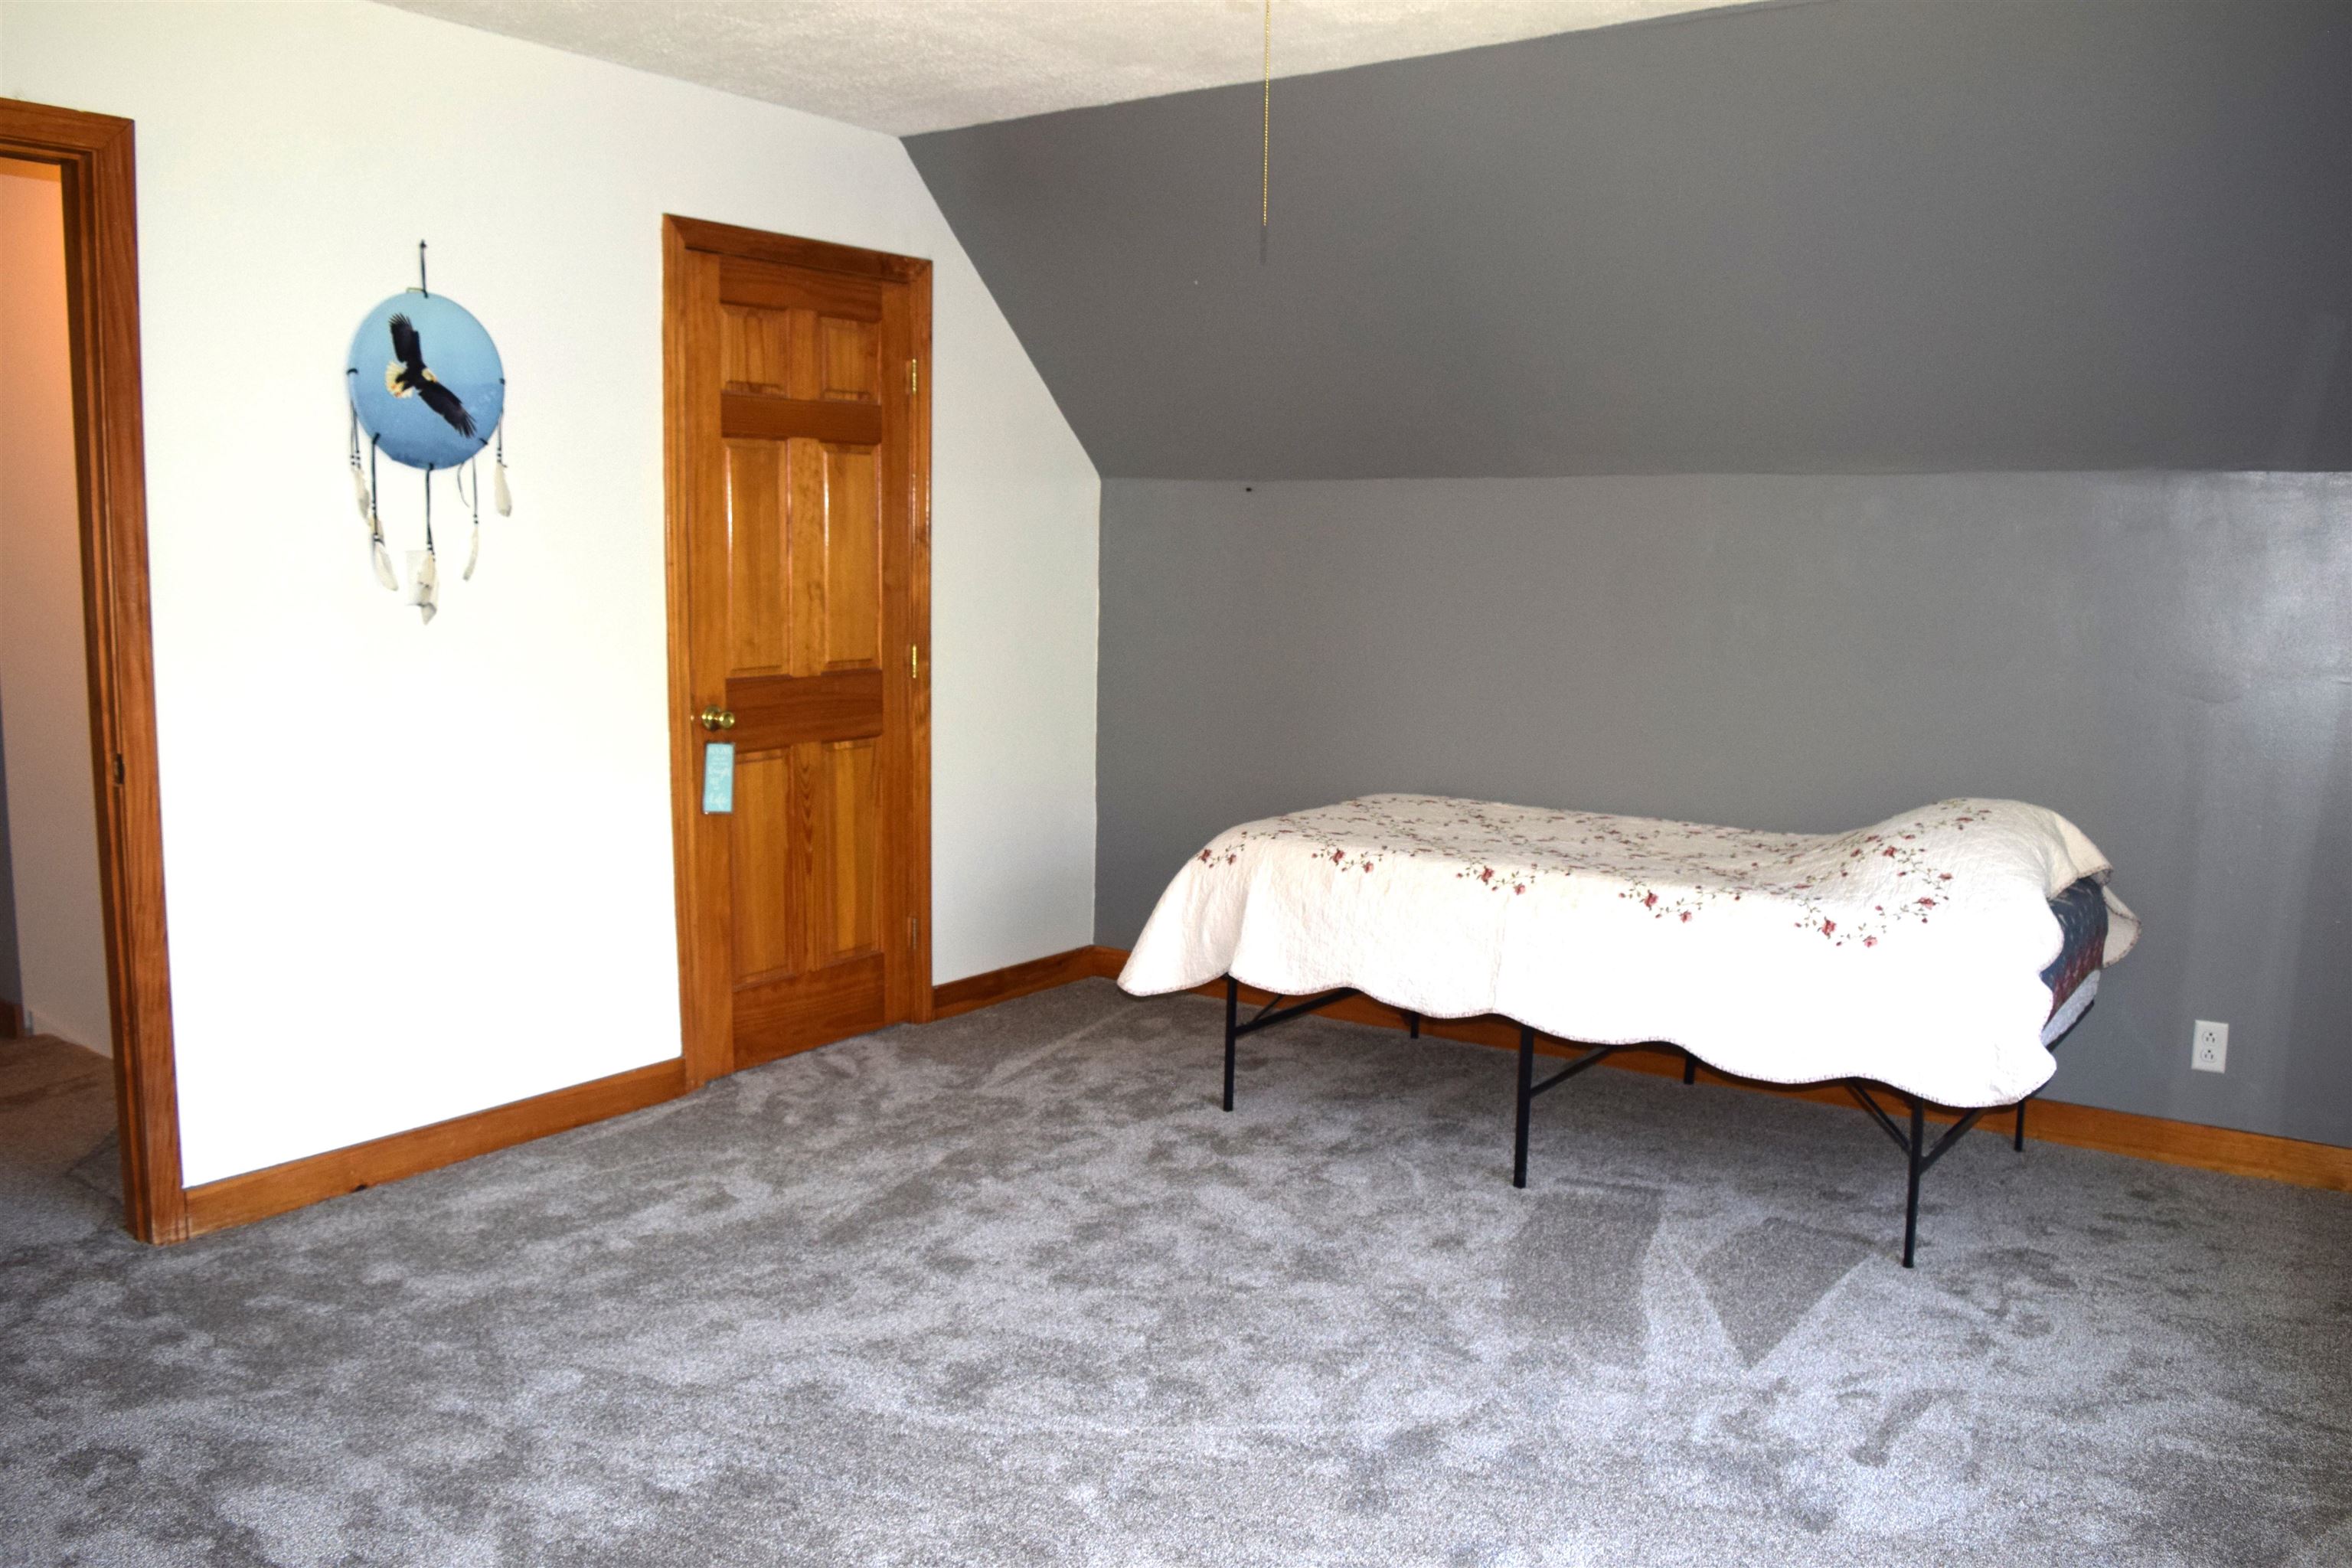 Spacious bedrooms with closets & all with new carpeting